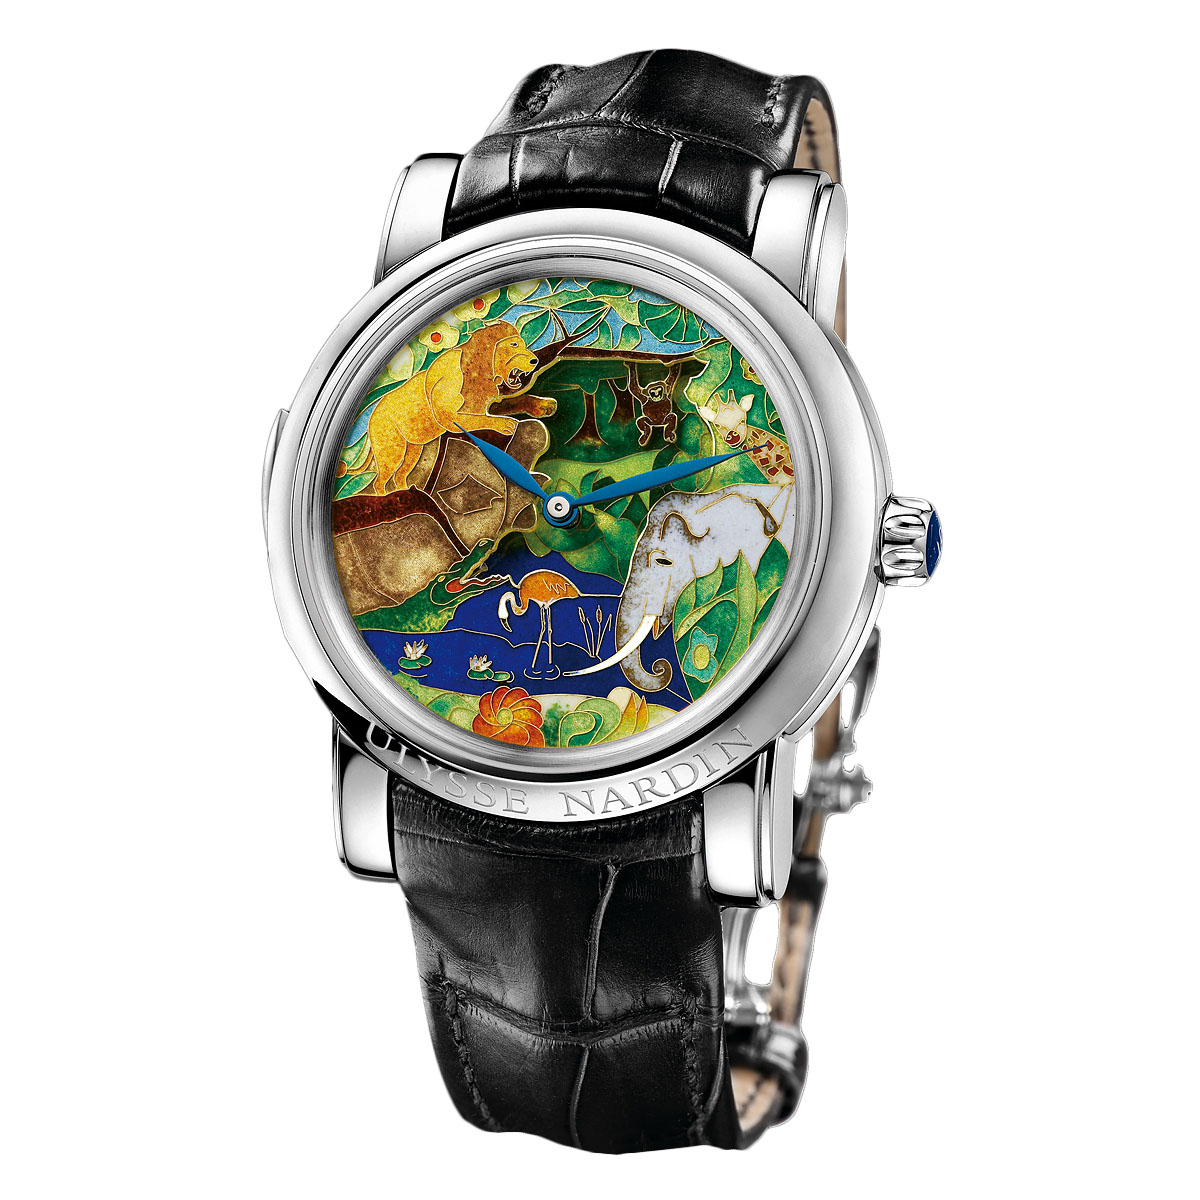 Safari Jaquemarts Minute Repeater in Platinum  on Black Crocodile Leather Strap with Cloisonne Enamel Dial